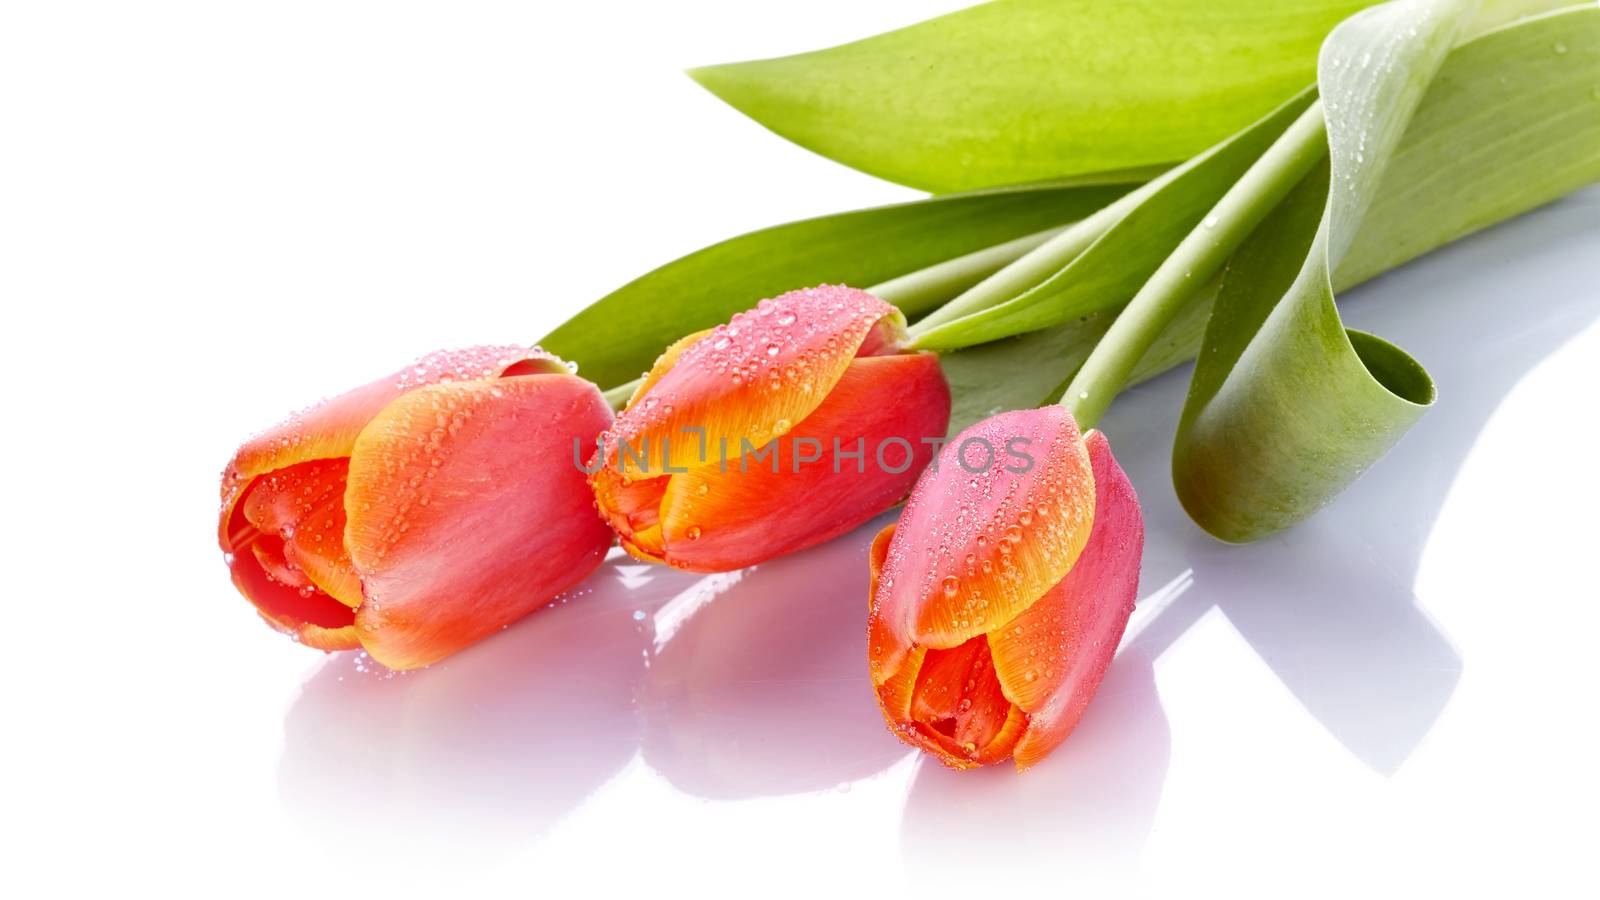 The bouquet of red tulips lies on a white background